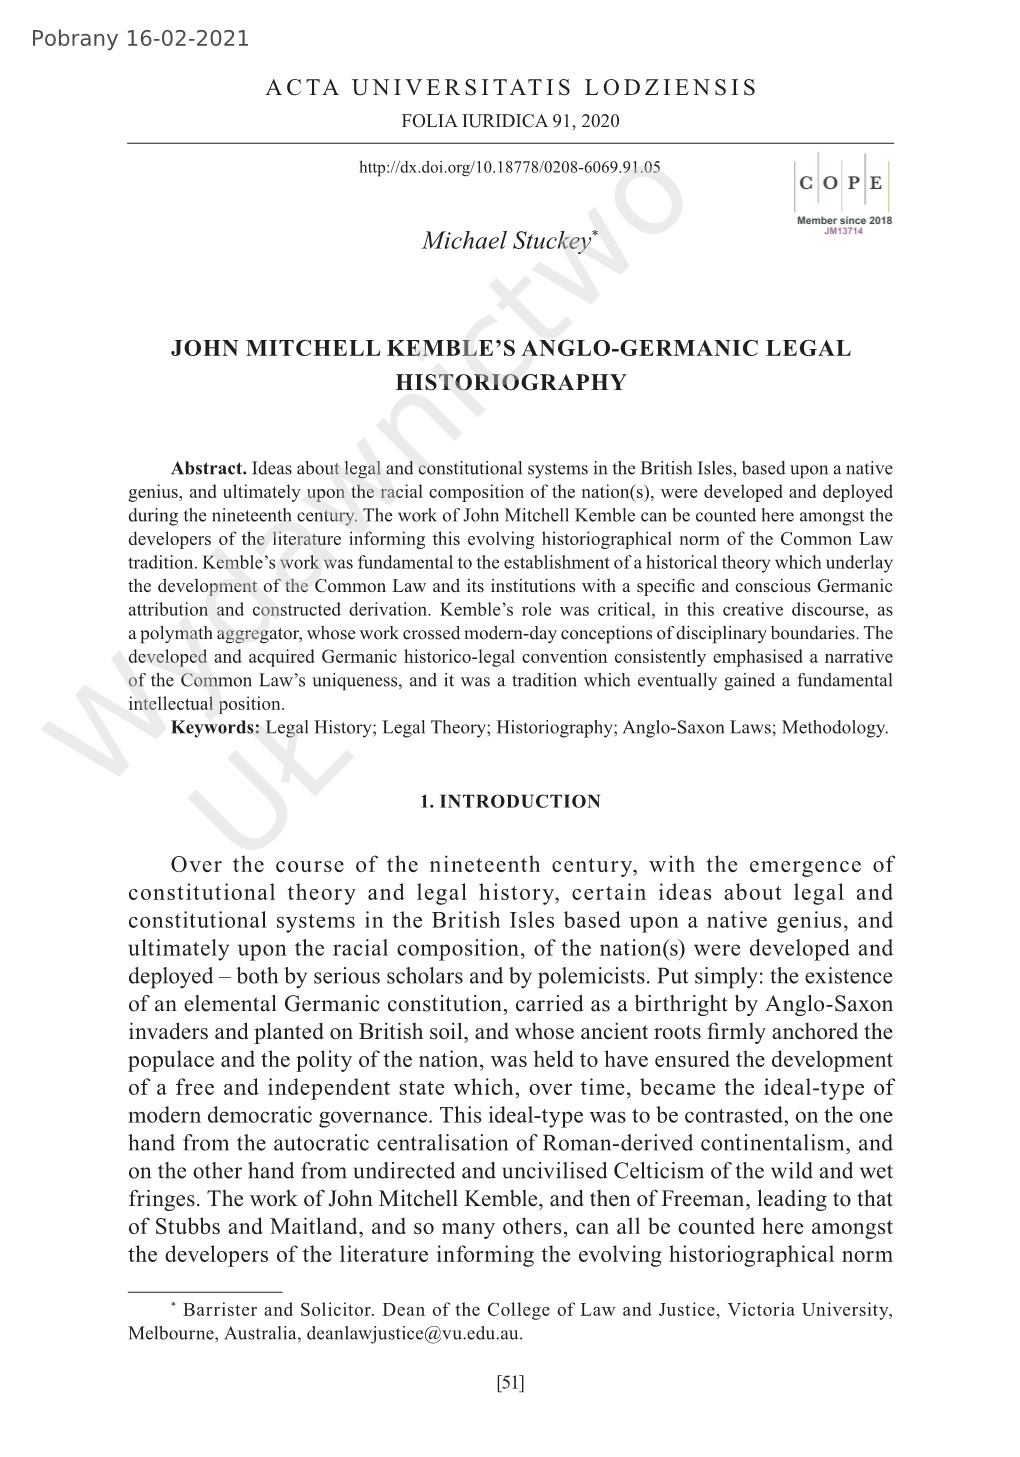 John Mitchell Kemble's Anglo-Germanic Legal Historiography